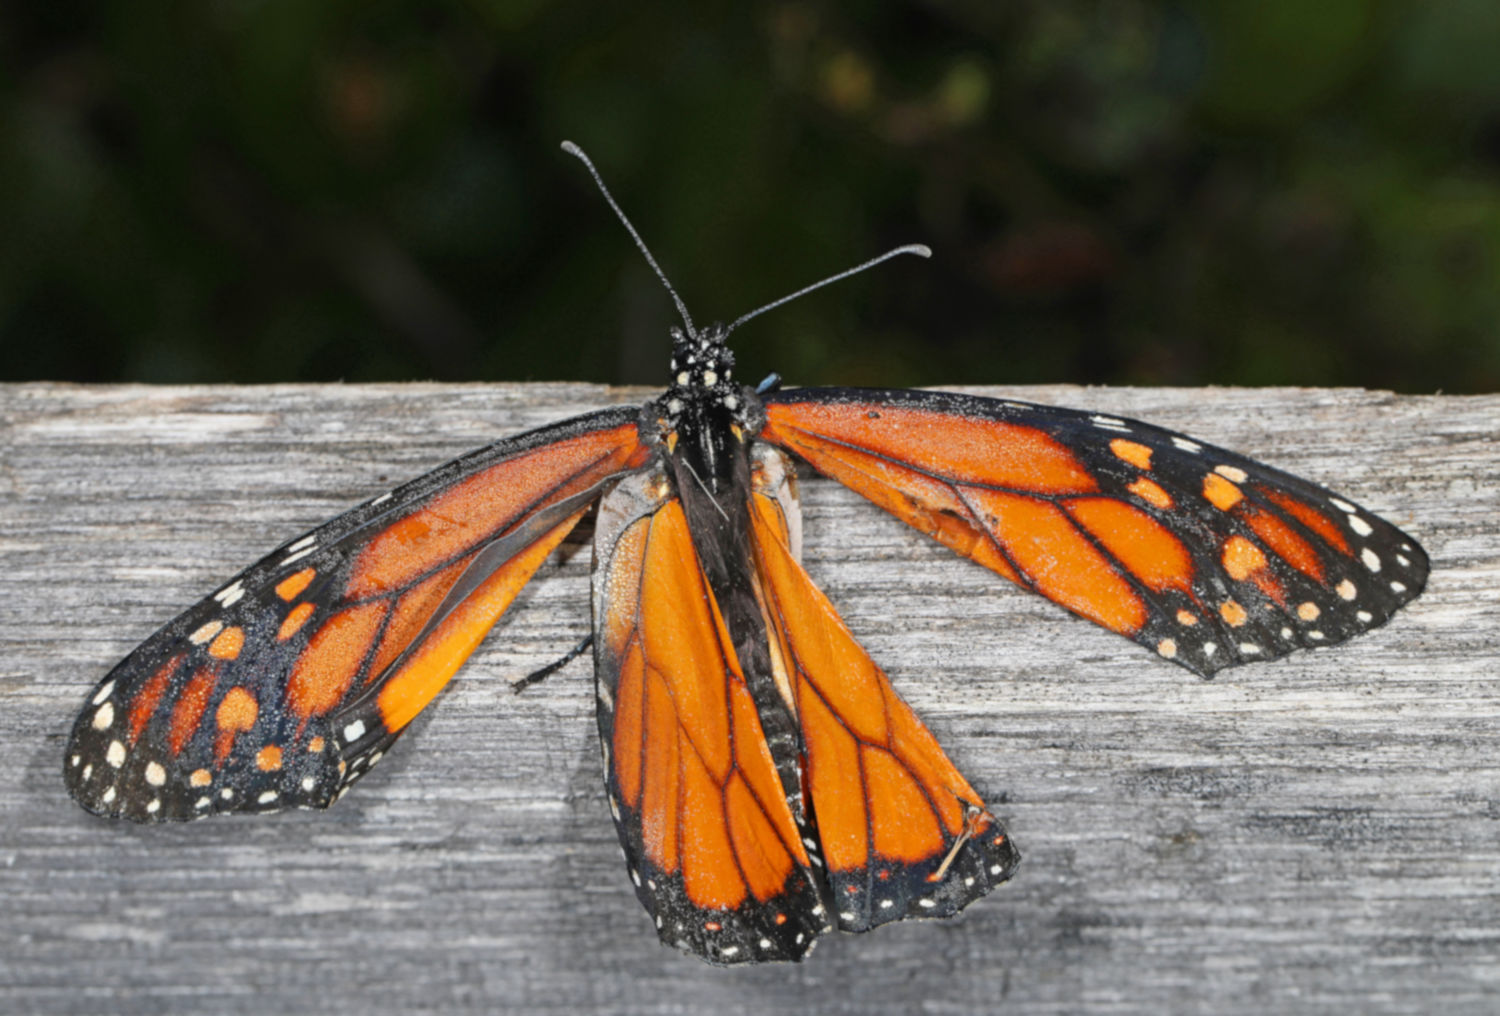 Monarch Butterflies Are Placed on IUCN Red List - The New York Times